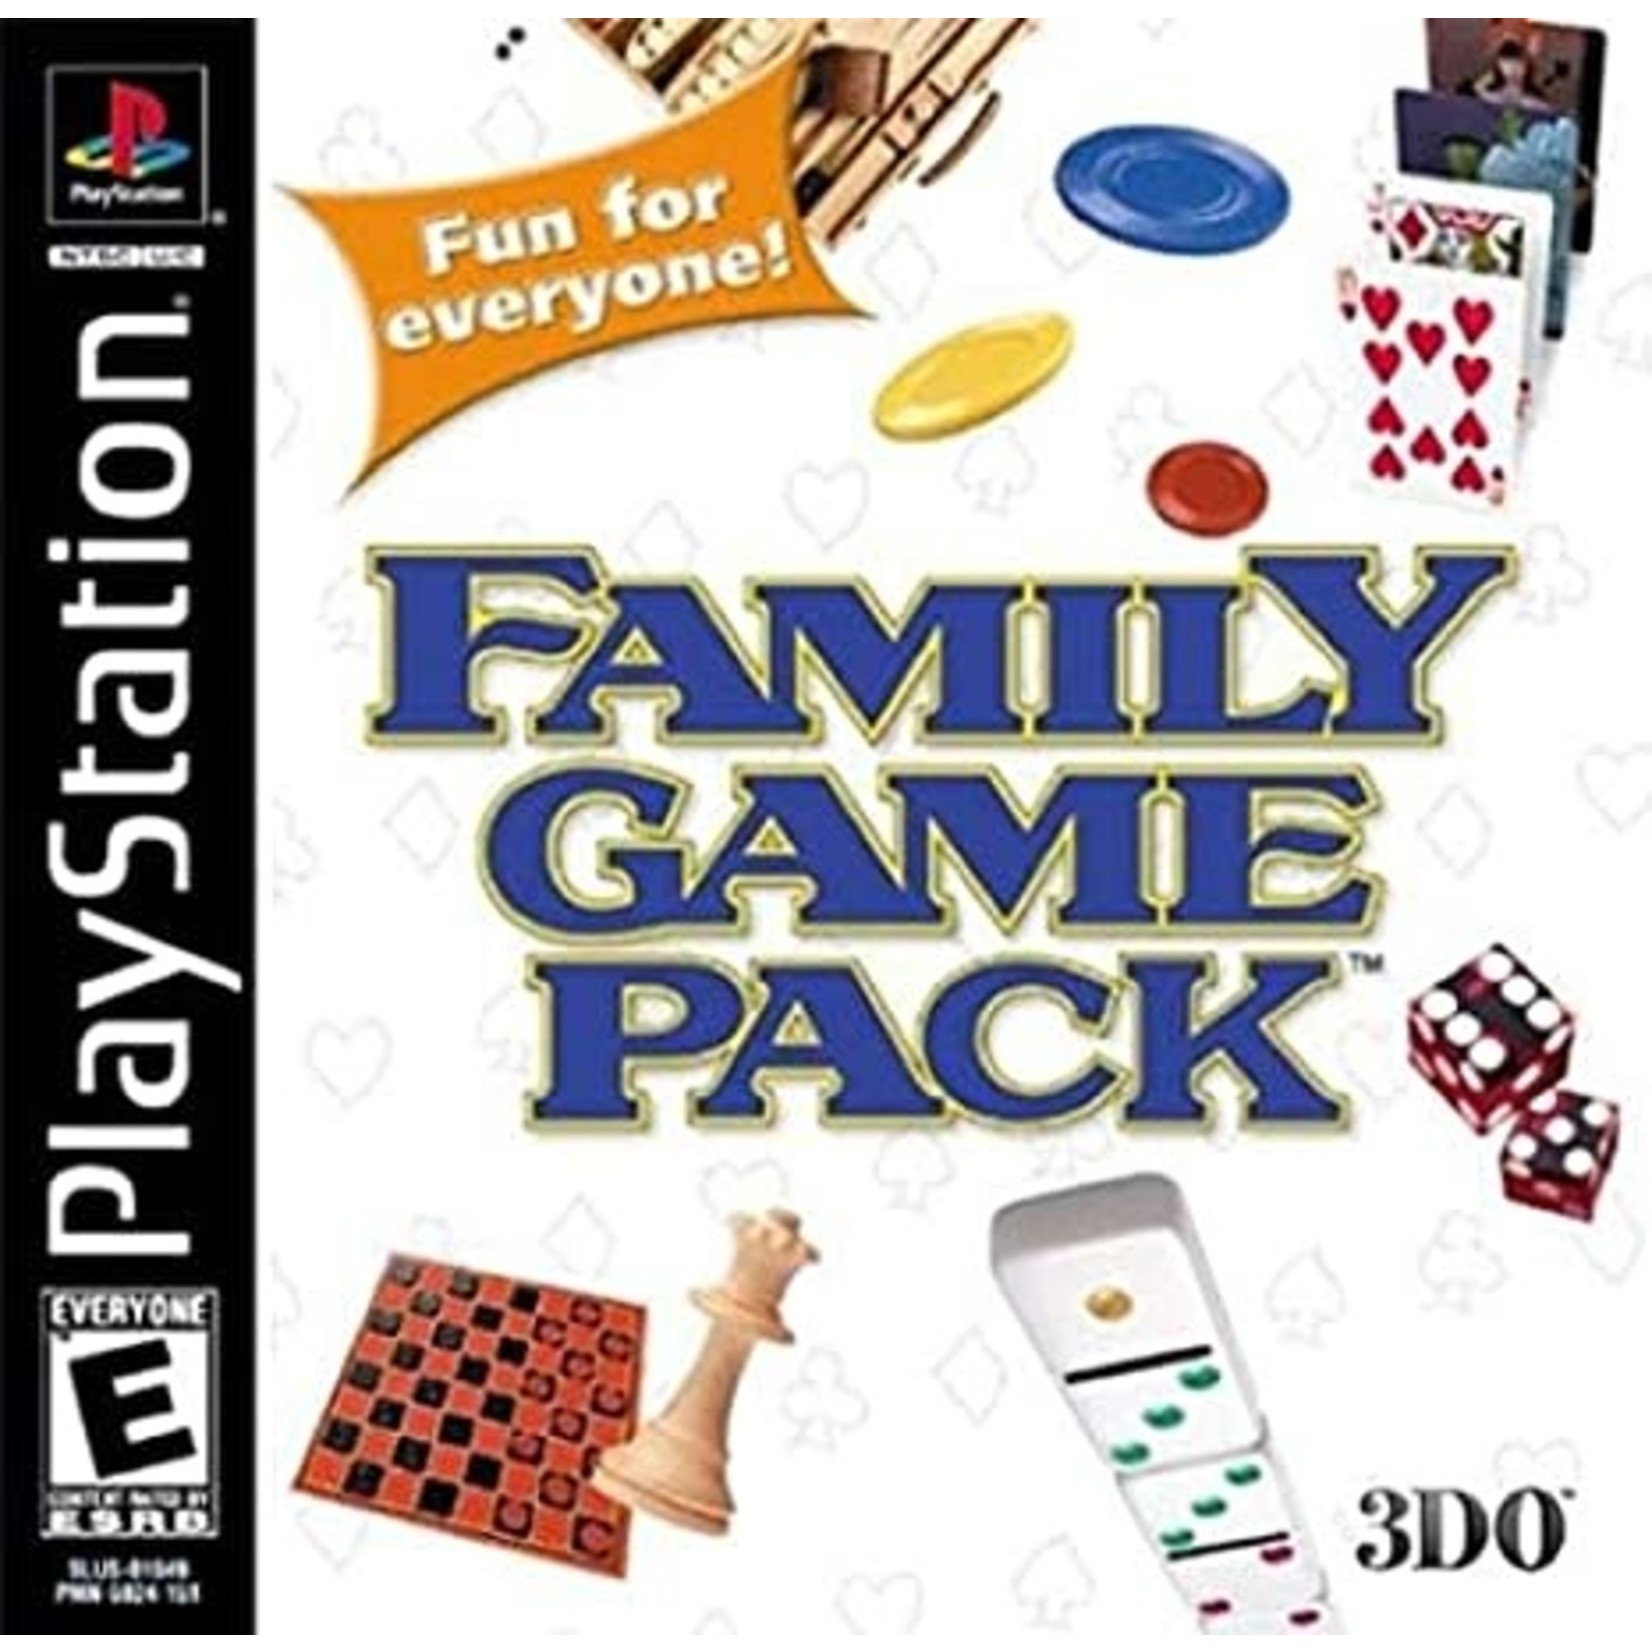 PS1U-FAMILY  GAME PACK